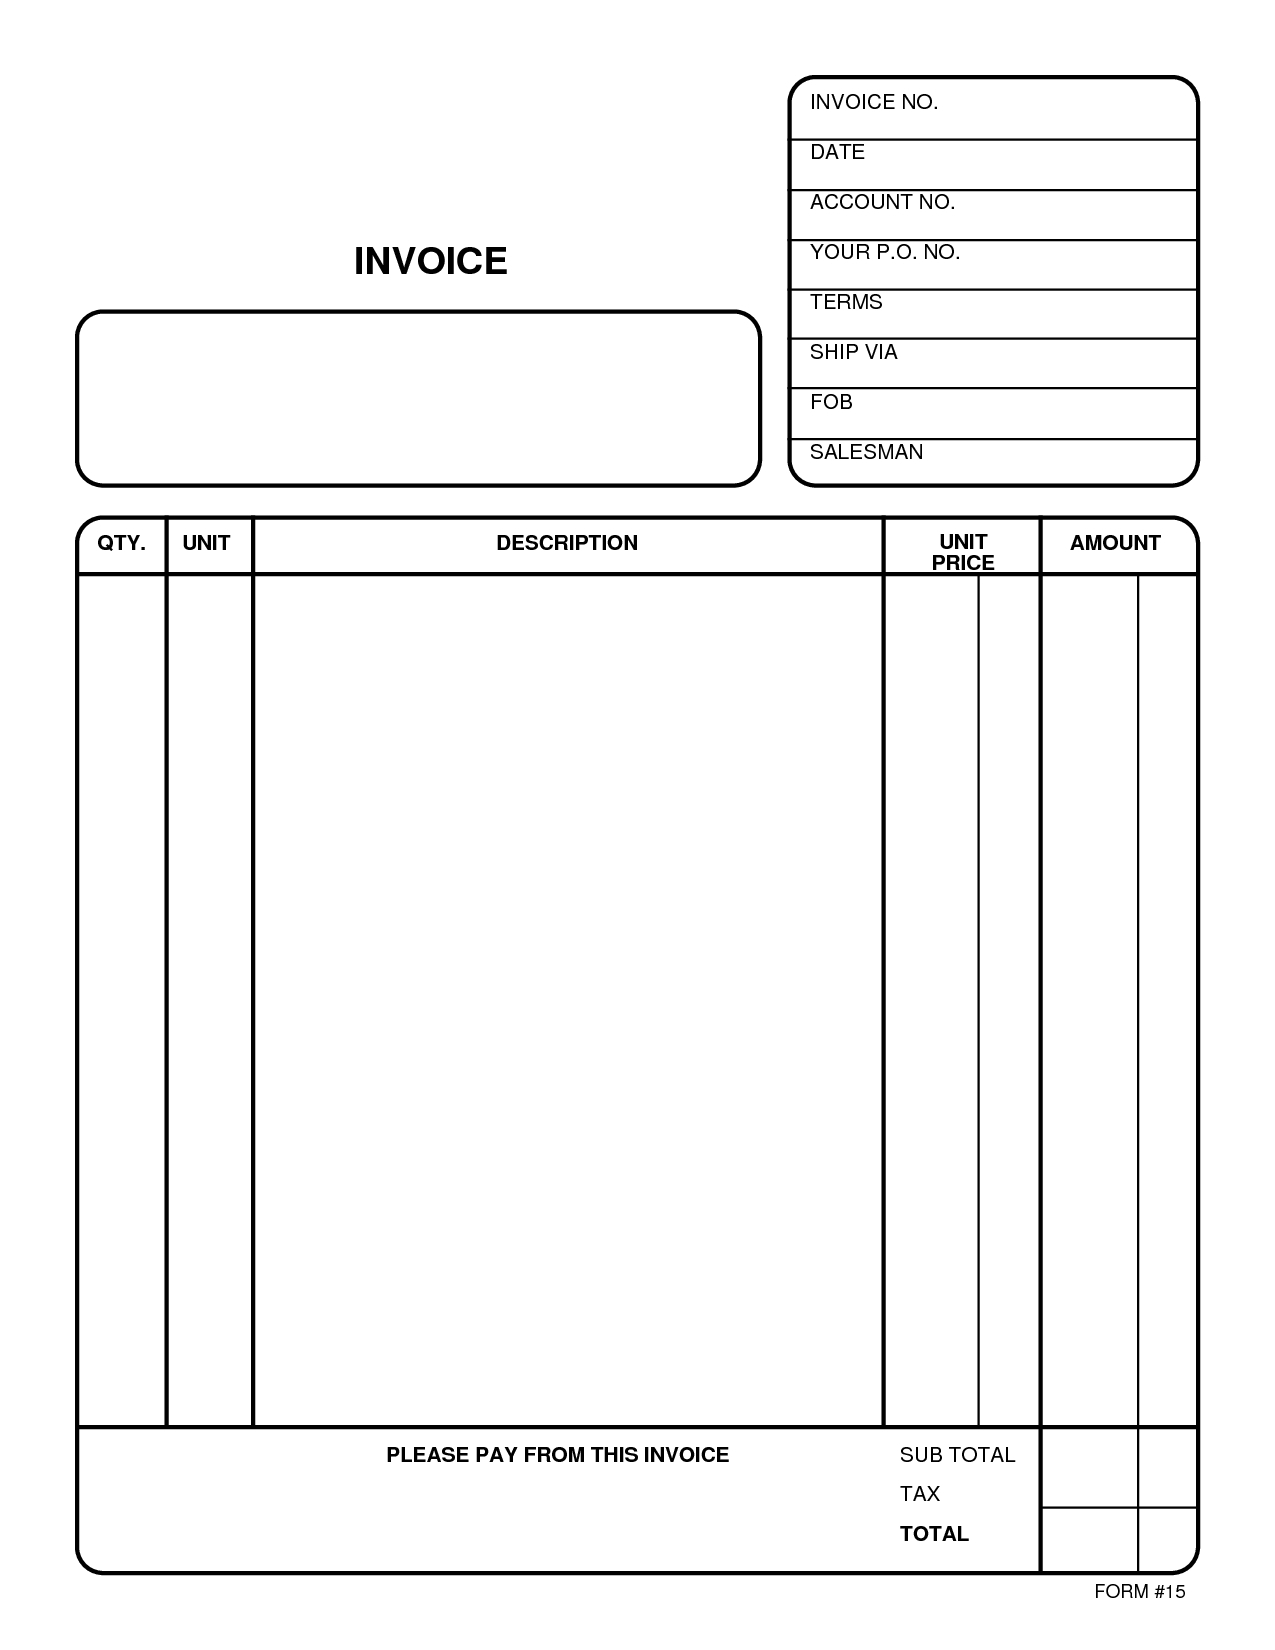 invoice free template free templates for invoices invoice template free 2016 1275 X 1650